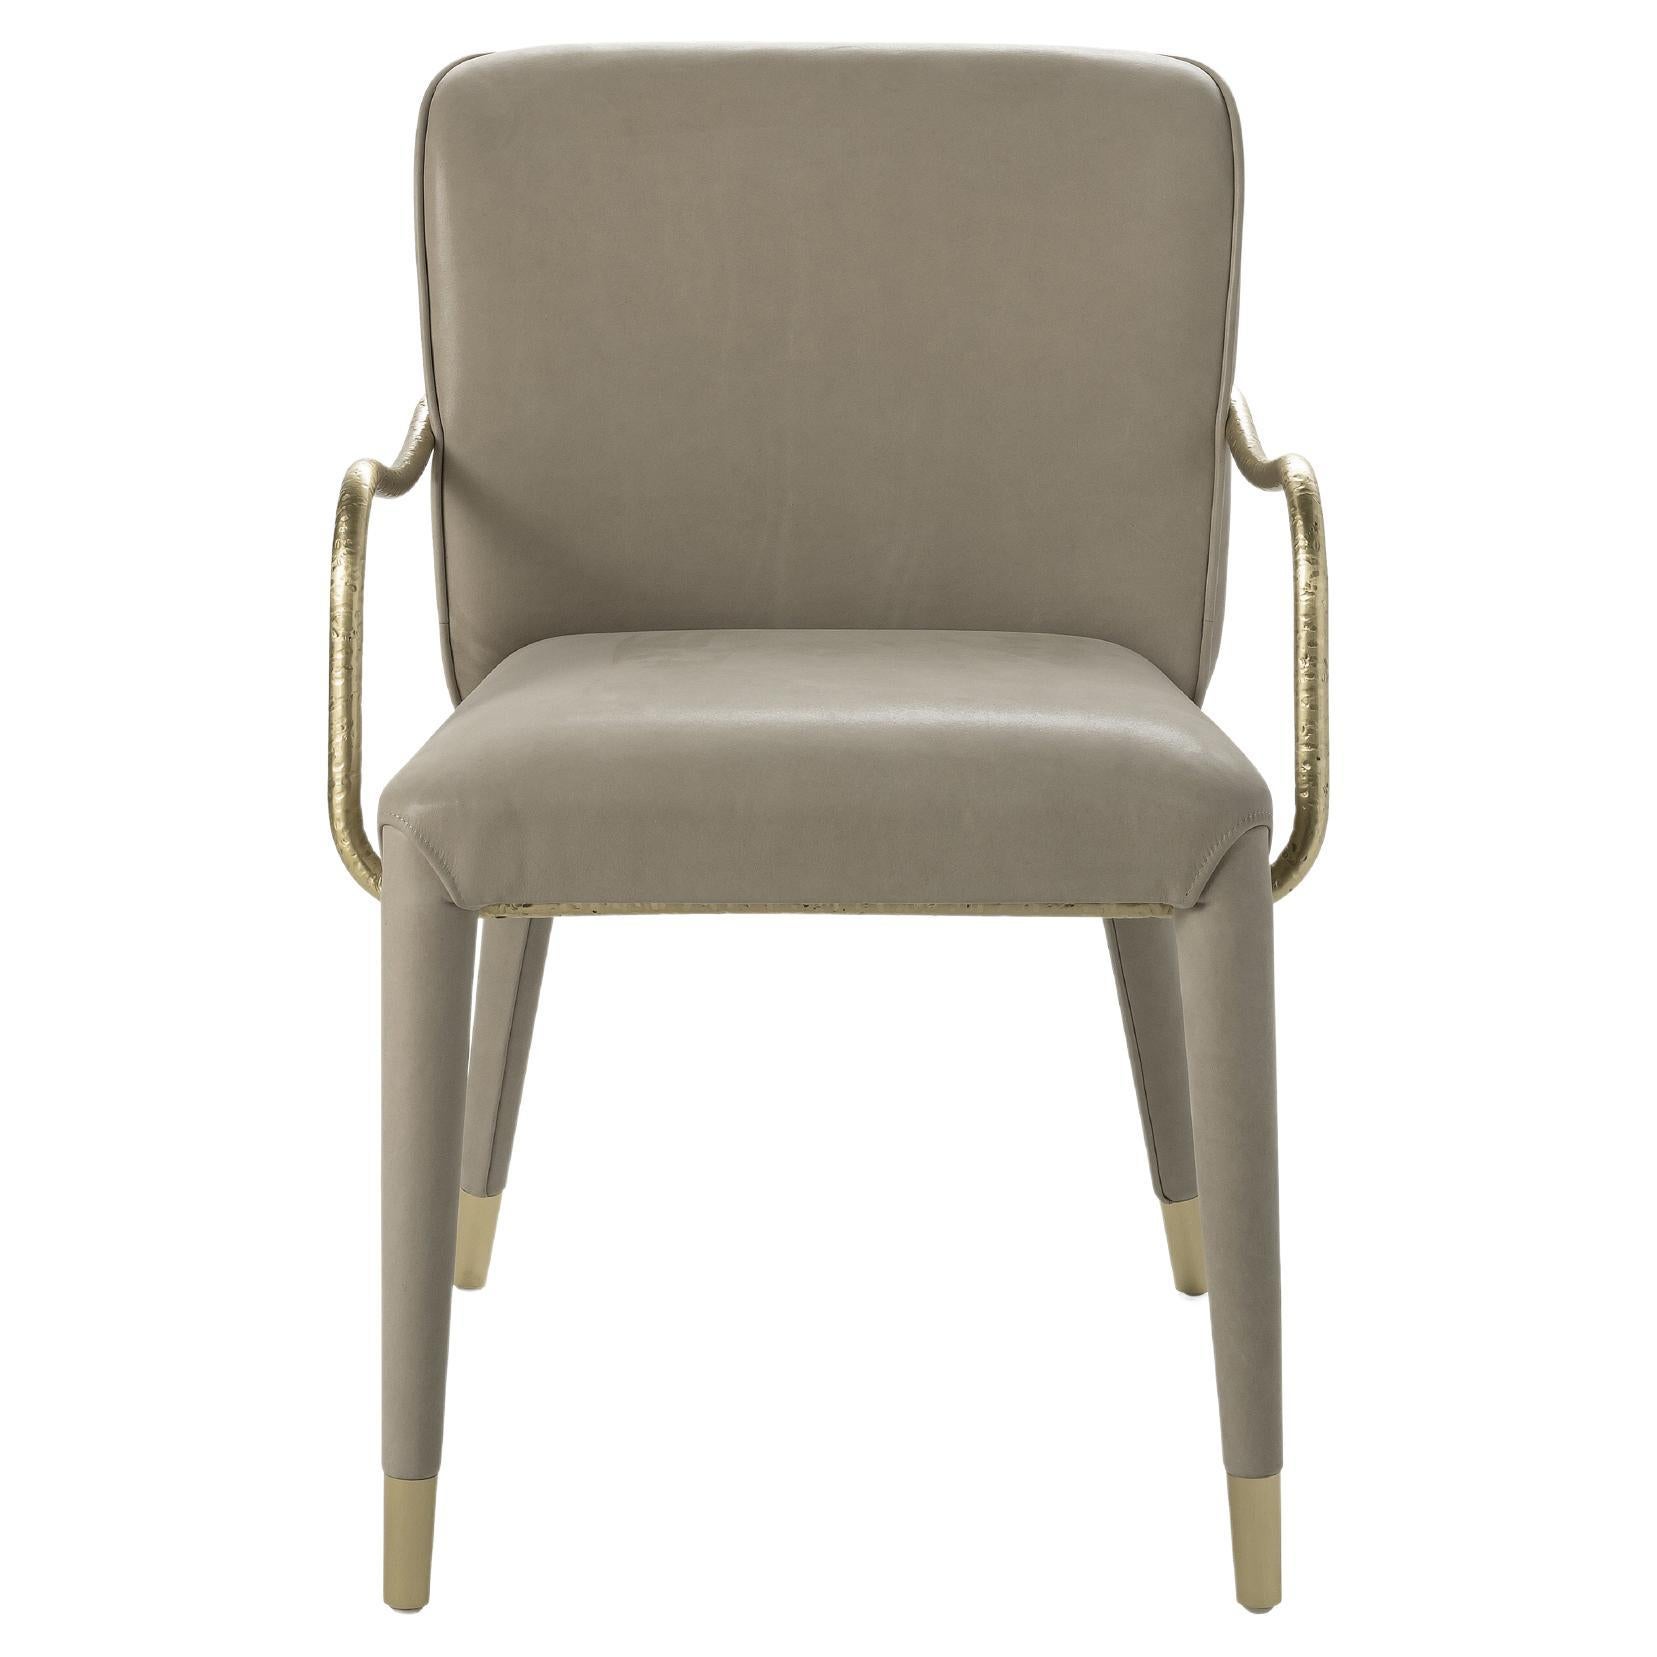 21st Century Kivu Chair in Leather by Roberto Cavalli Home Interiors